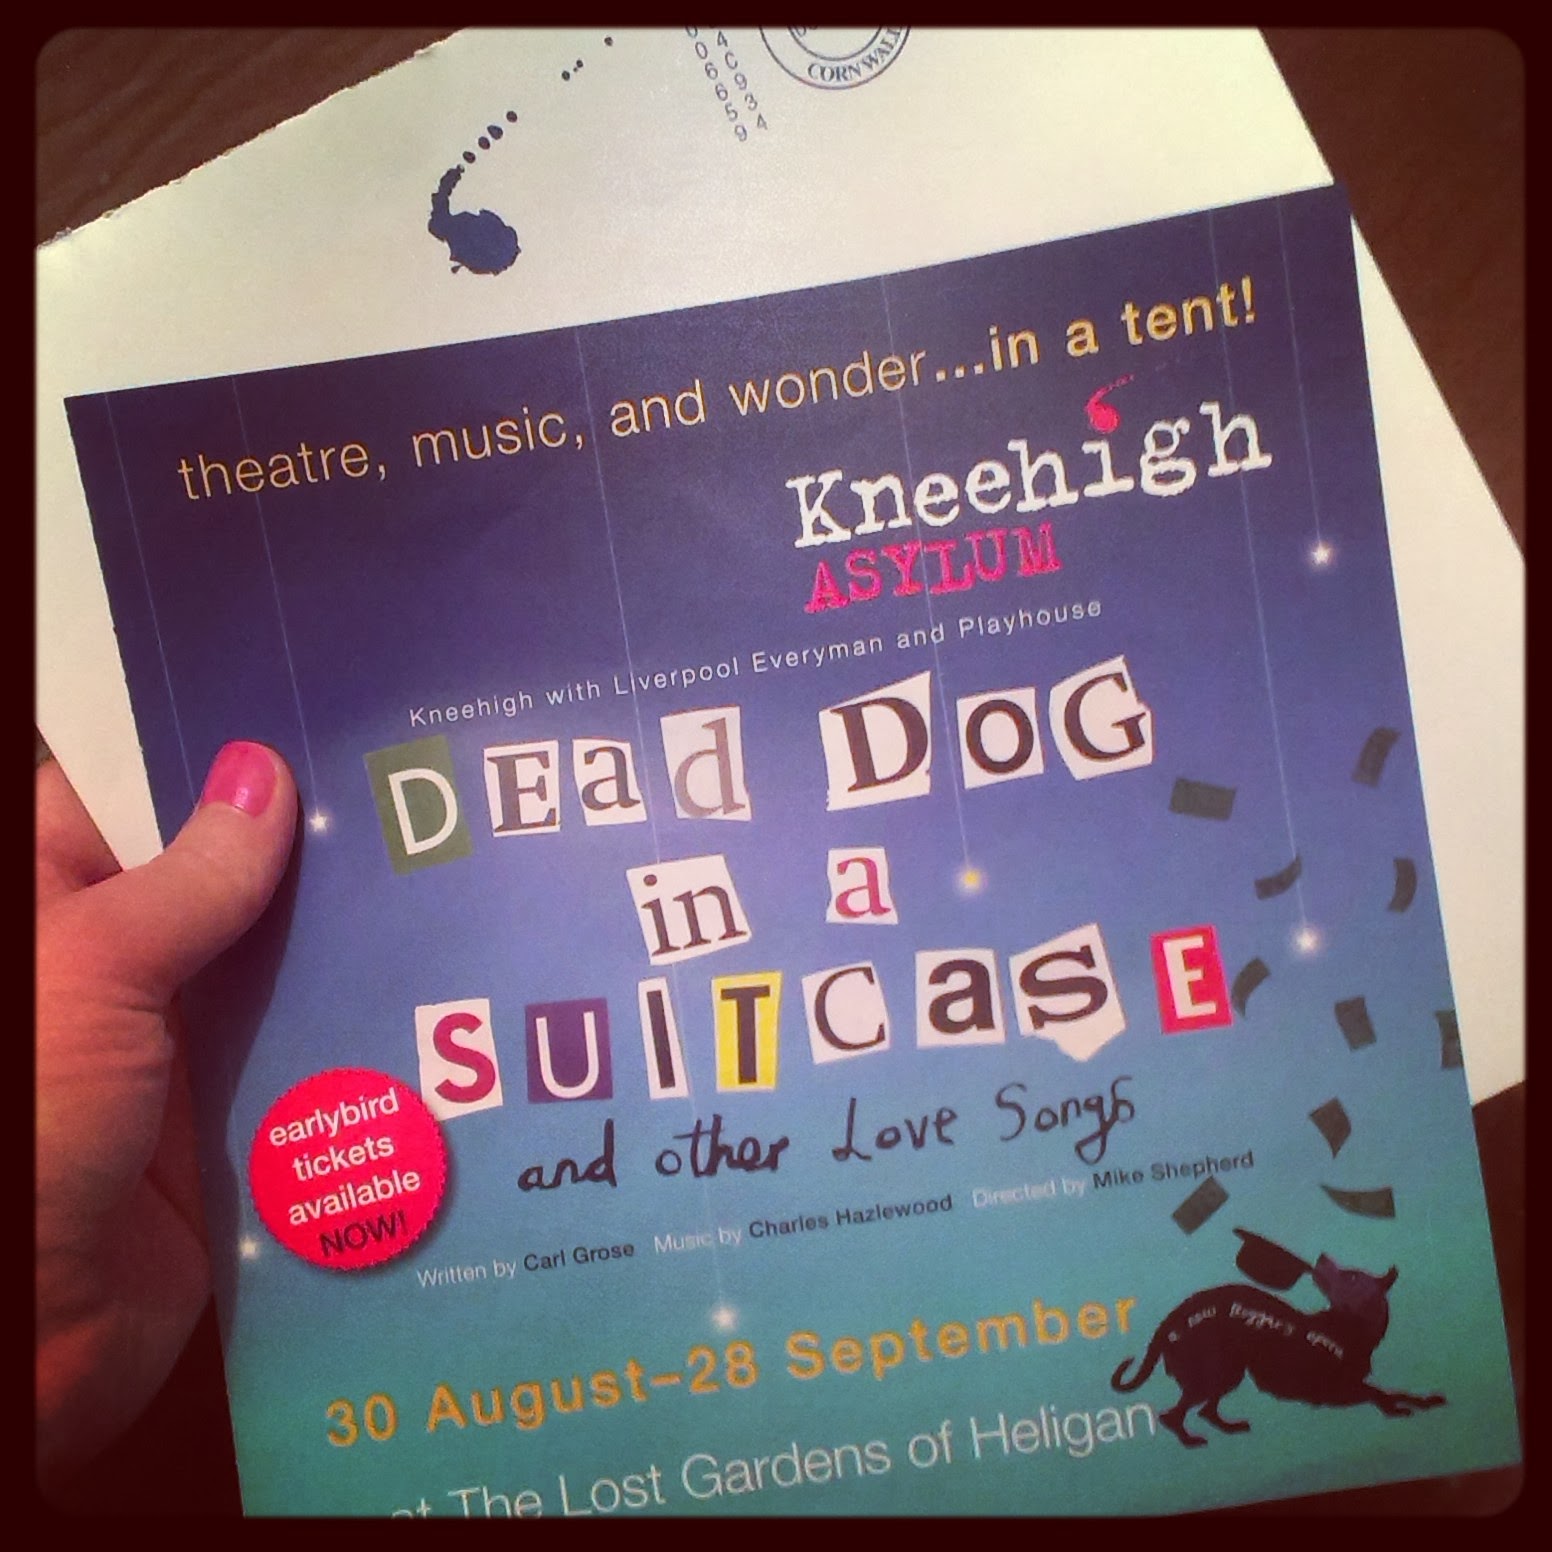 Kneehigh Theatre's new show - Dead Dog in a Suitcase (and other love stories)